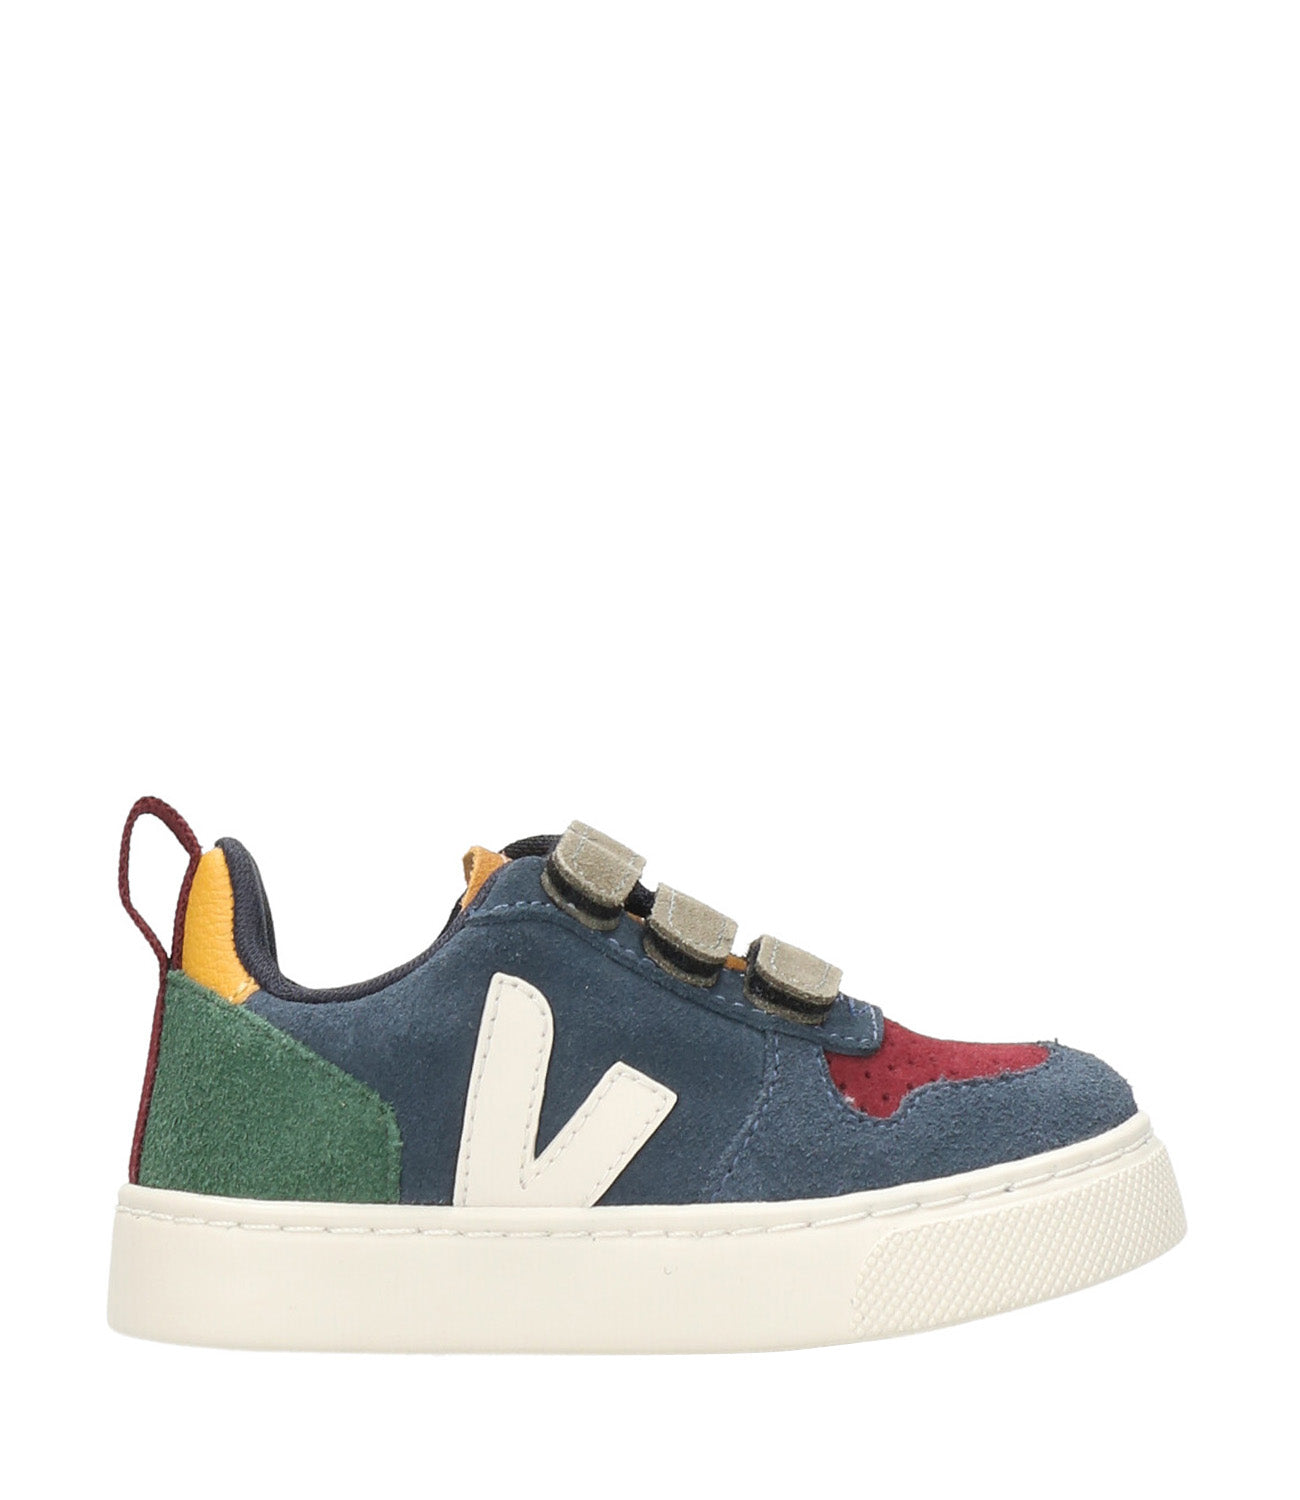 Veja Kids | Blue,Bordeaux and Green Sneakers